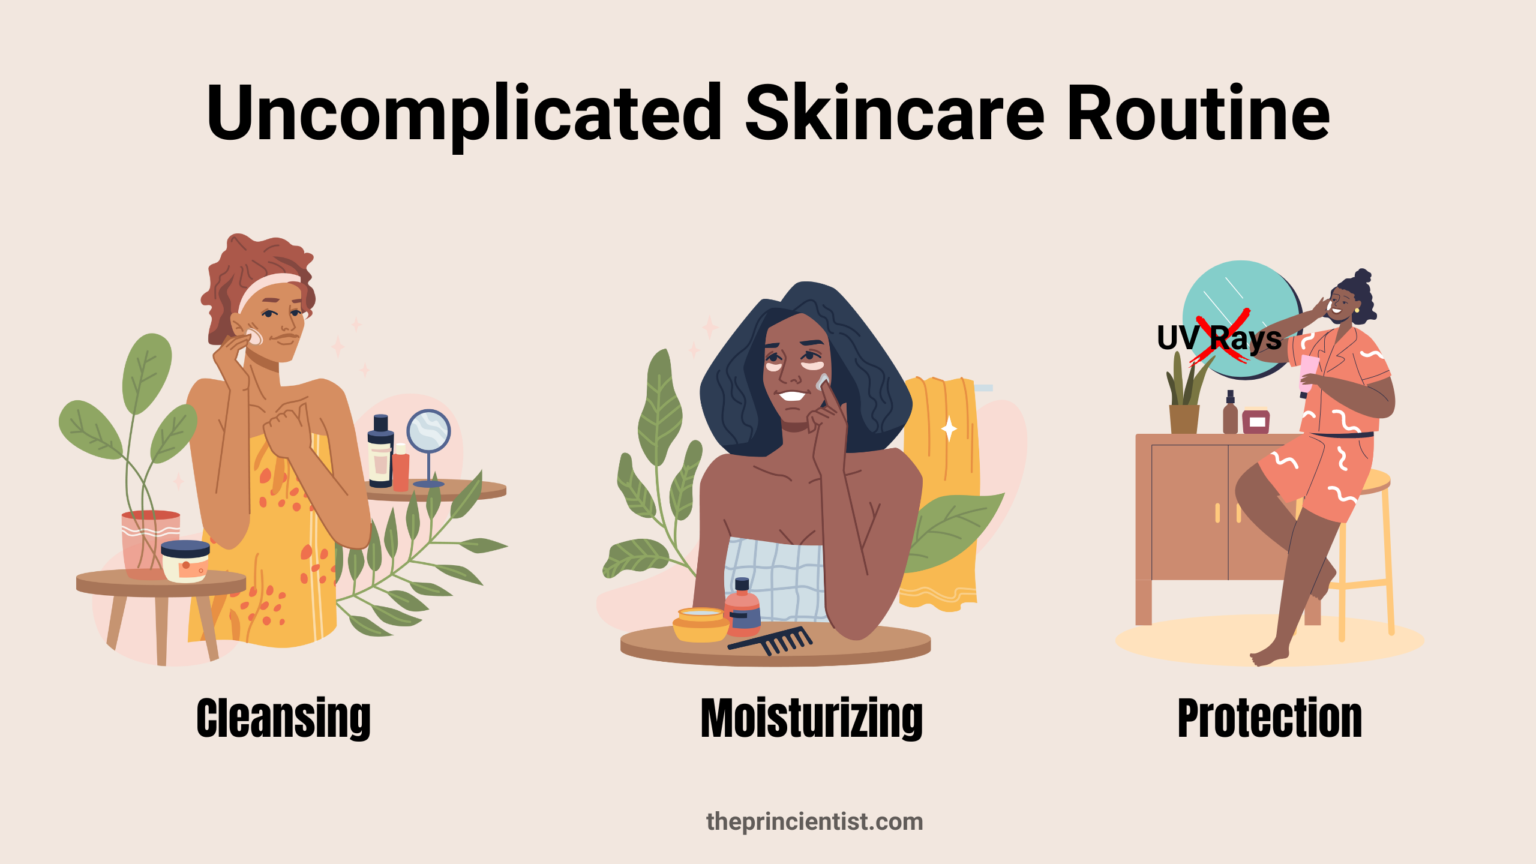 representative images of black woman following the 3 steps of an uncomplicated skincare routine: washing the face, applying moisturizer and sunscreen